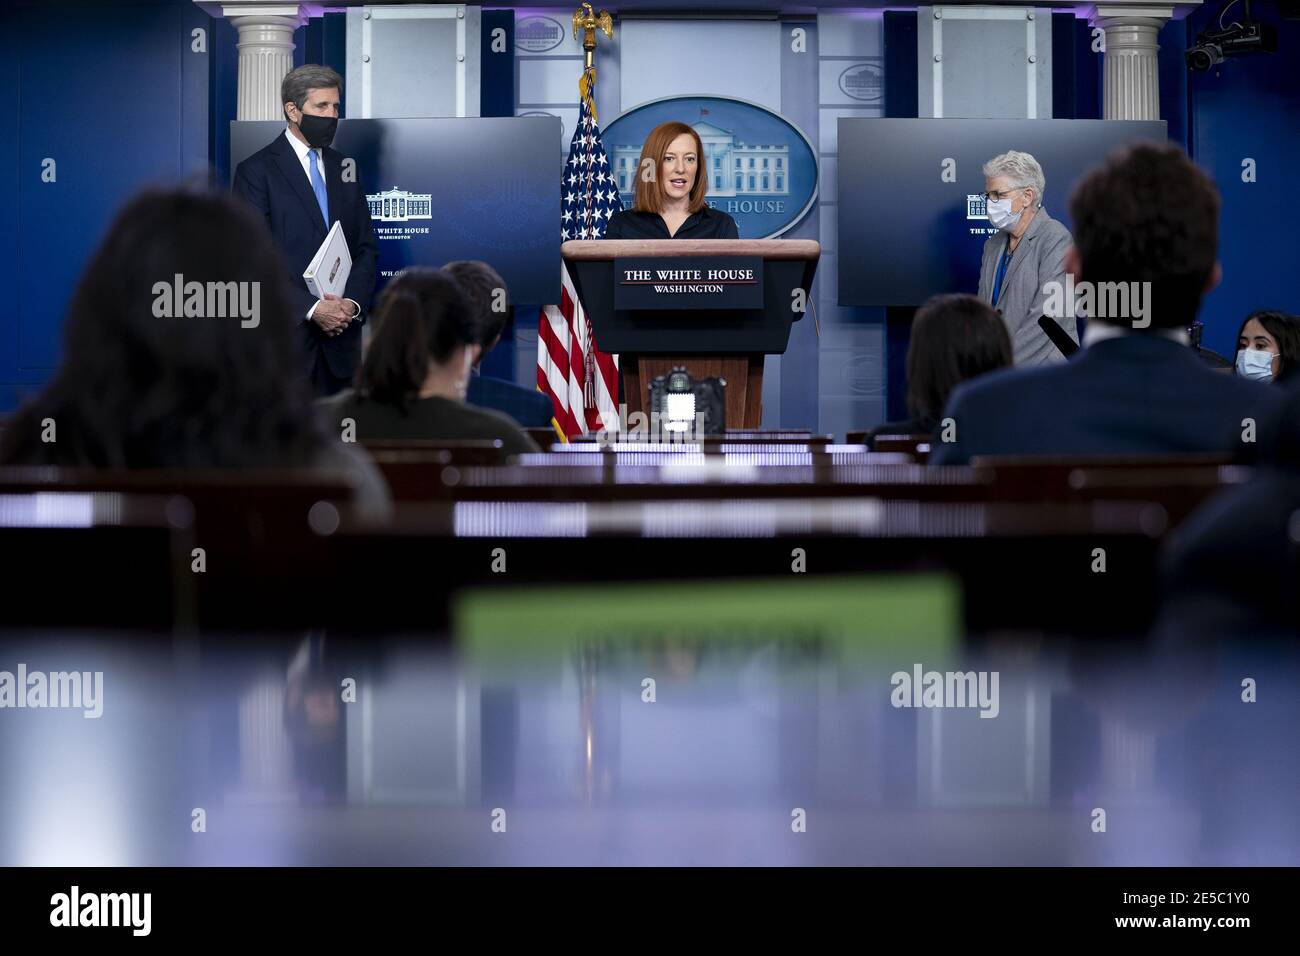 Washington, United States. 27th Jan, 2021. Jen Psaki, White House press secretary, speaks alongside John Kerry, Special Presidential Envoy for Climate, left, and Gina McCarthy, National Climate Advisor, right, during a news conference in the James S. Brady Press Briefing Room at the White House in Washington, DC, U.S., on Wednesday, Jan. 27, 2021. U.S. President Joe Biden will take executive action on Wednesday to combat climate change, including temporarily blocking new leases for oil drilling on federal lands, ordering a review of fossil-fuel subsidies and other measures to overhaul the U.S. Stock Photo